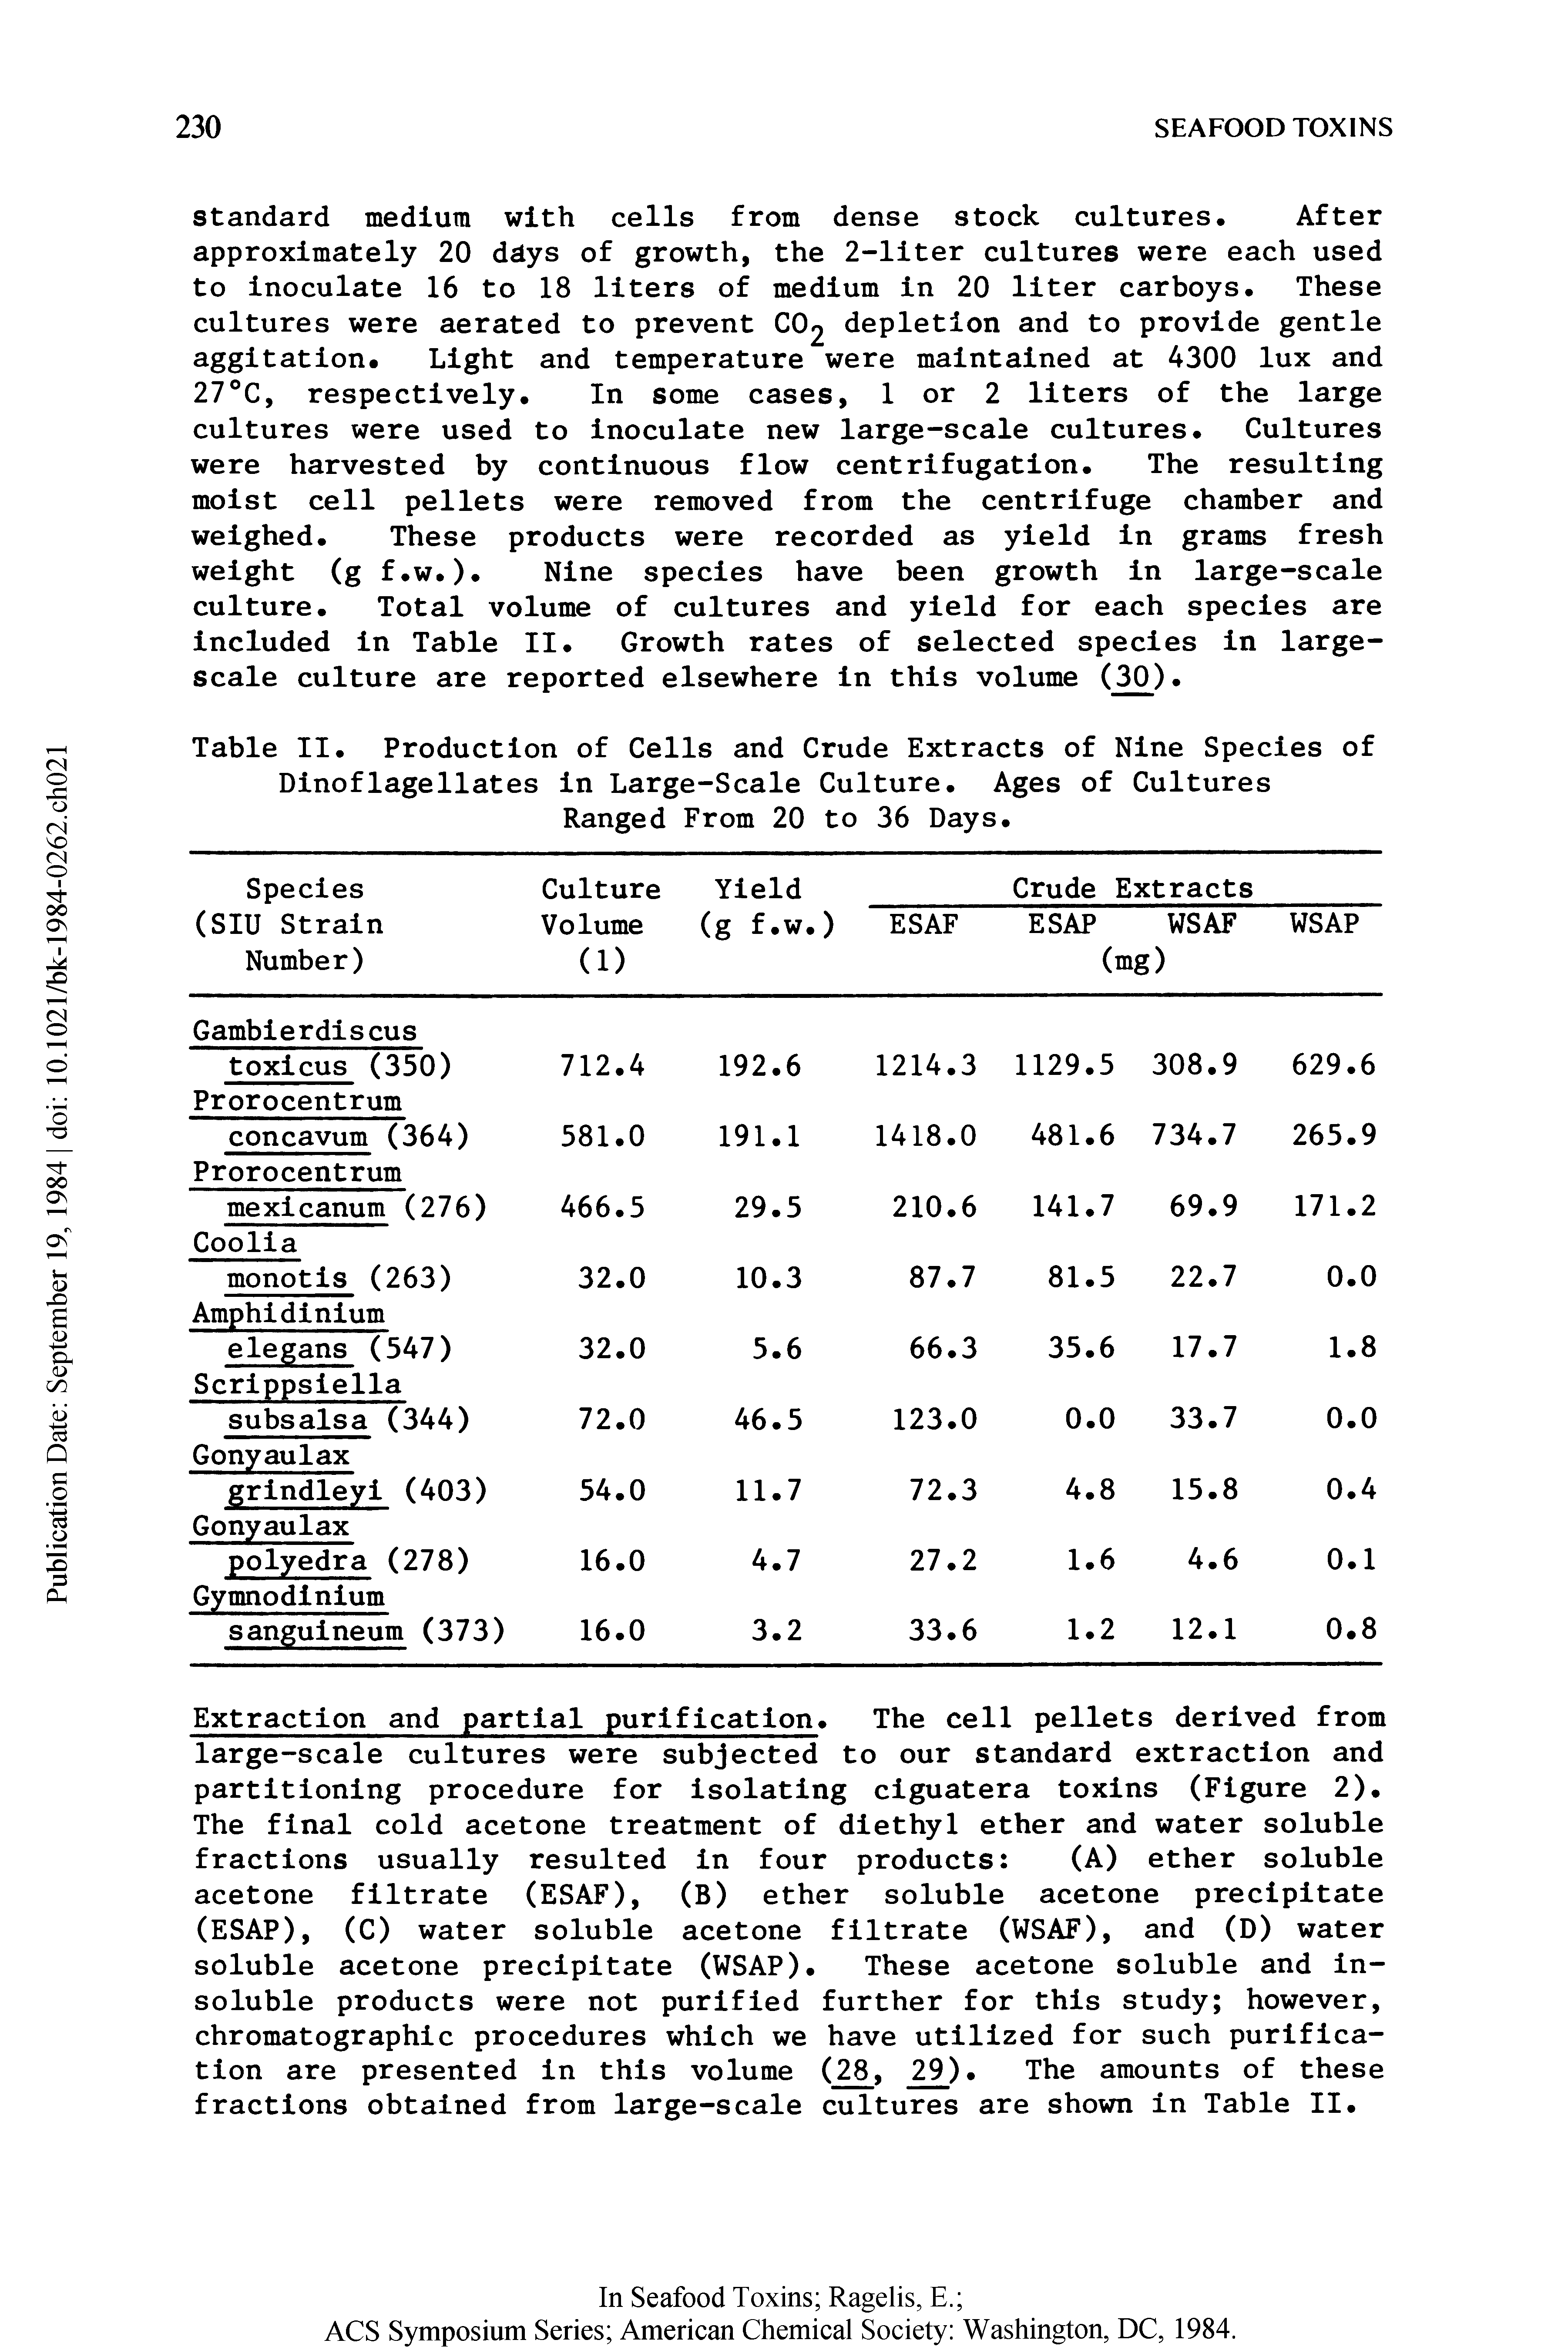 Table II. Production of Cells and Crude Extracts of Nine Species of Dinoflagellates in Large-Scale Culture. Ages of Cultures Ranged From 20 to 36 Days.